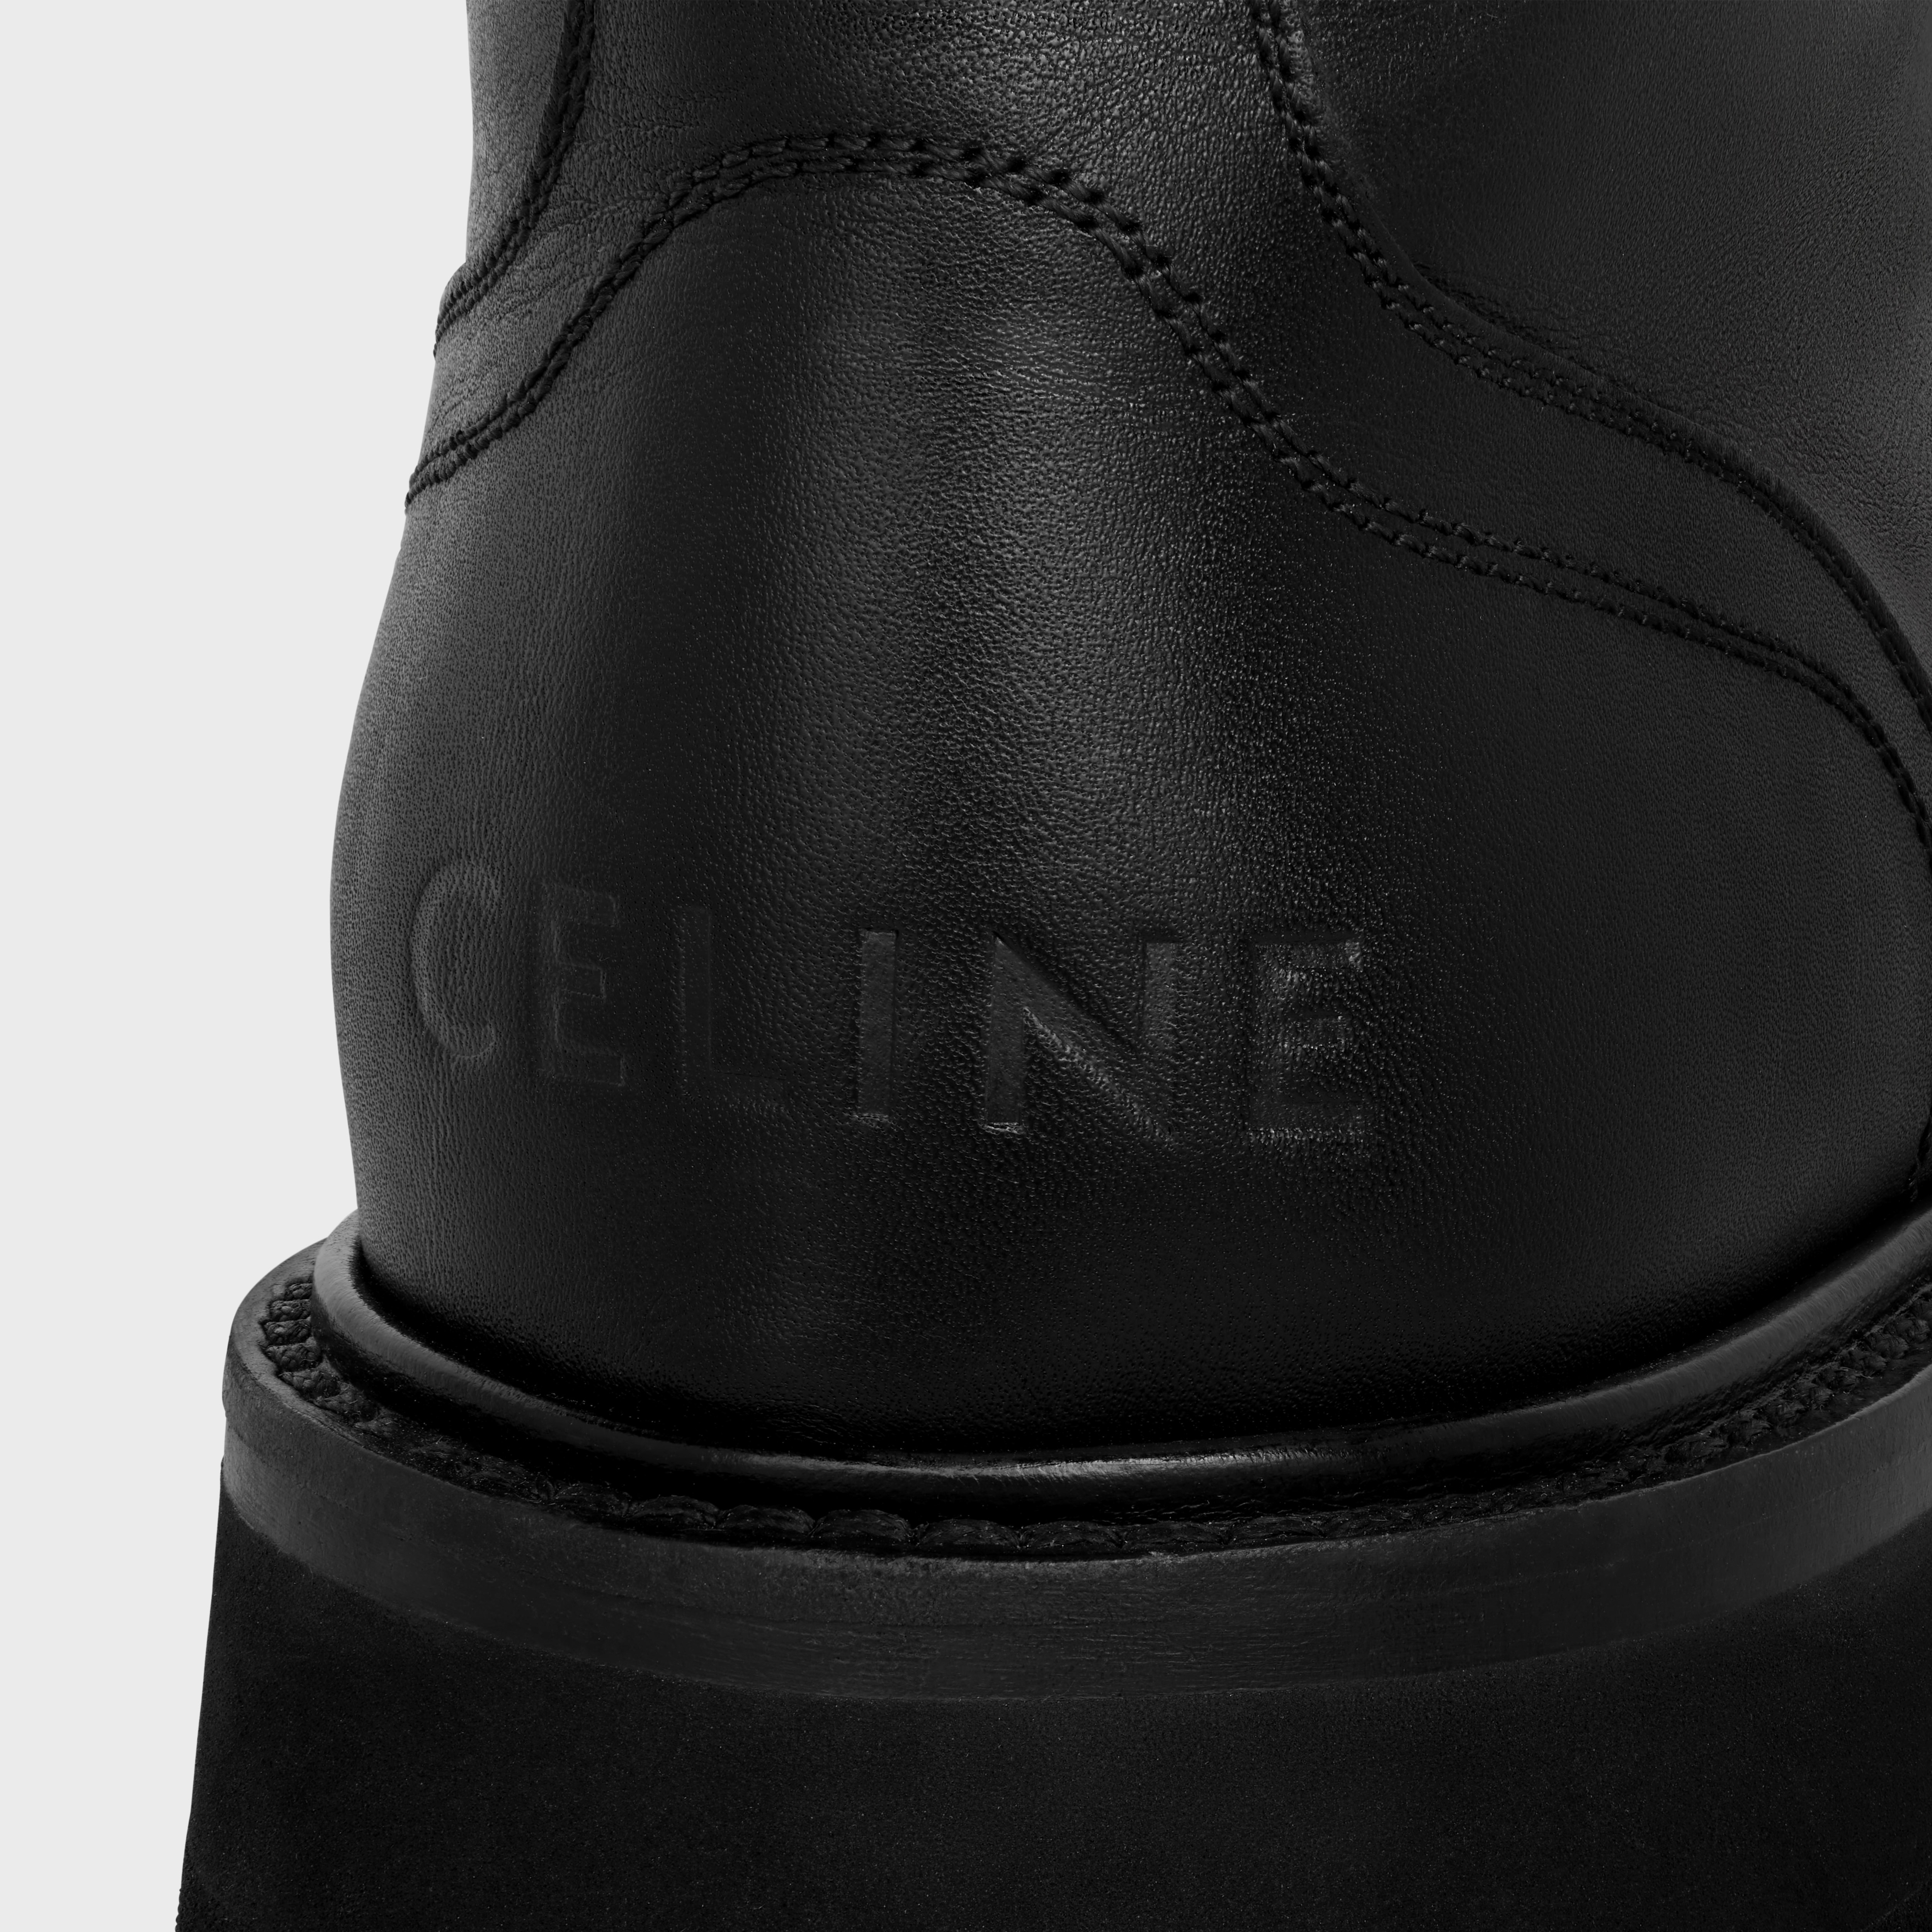 CELINE BULKY MAXX LACE-UP BOOT WITH CUFFS in SHINY BULL - 5